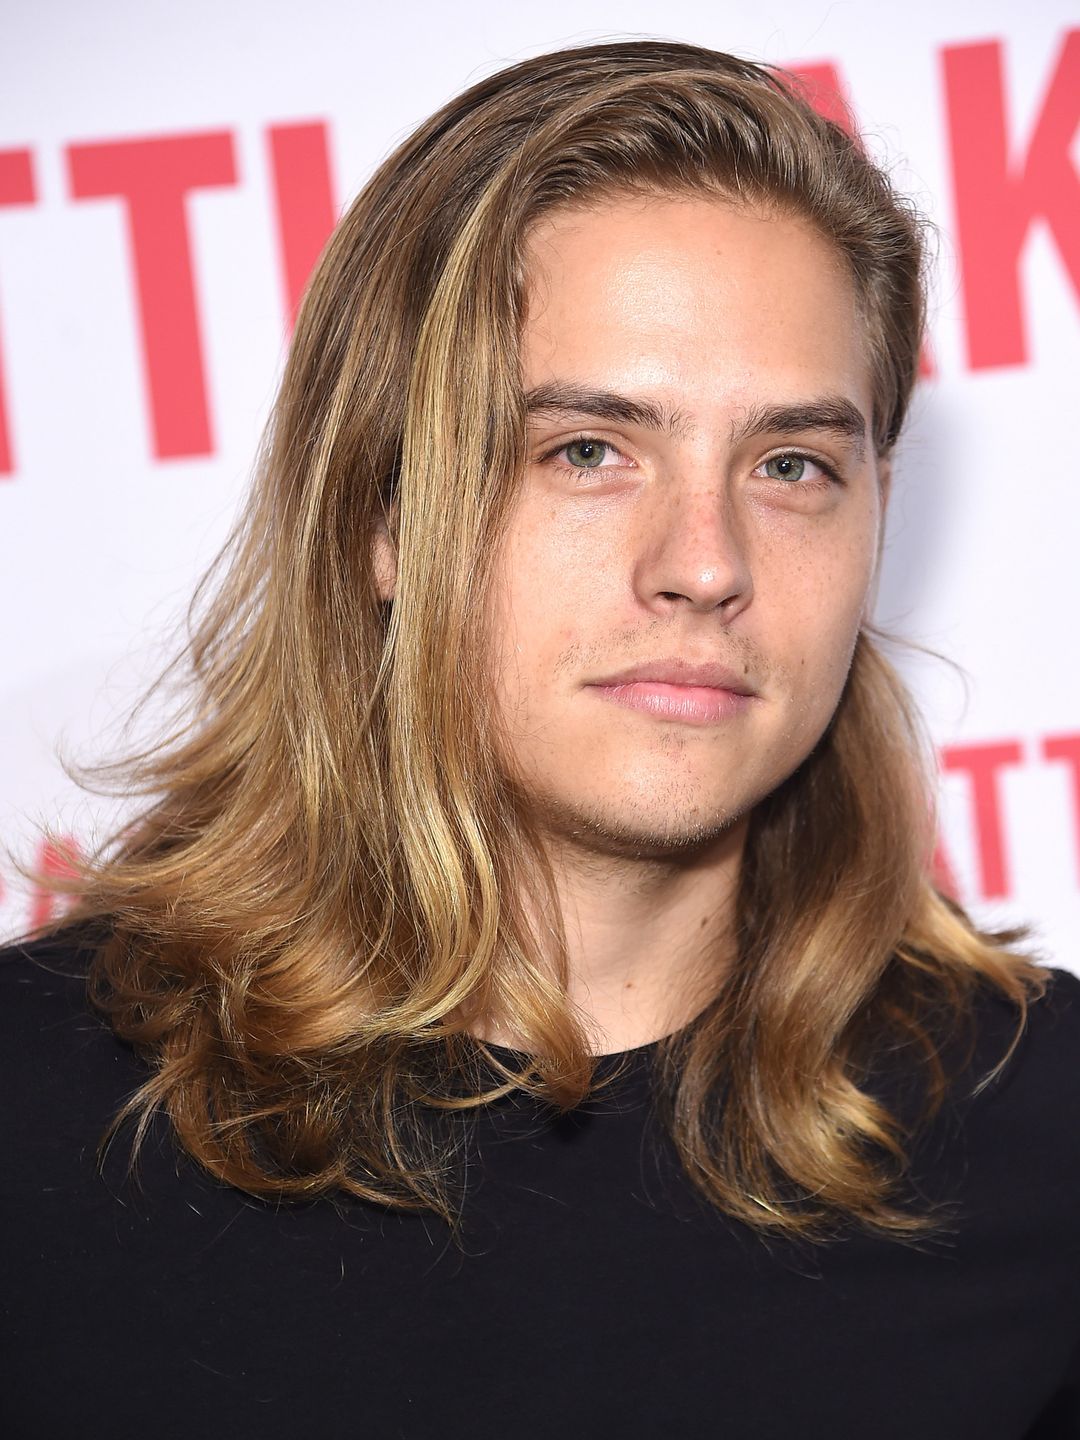 Dylan Sprouse early life